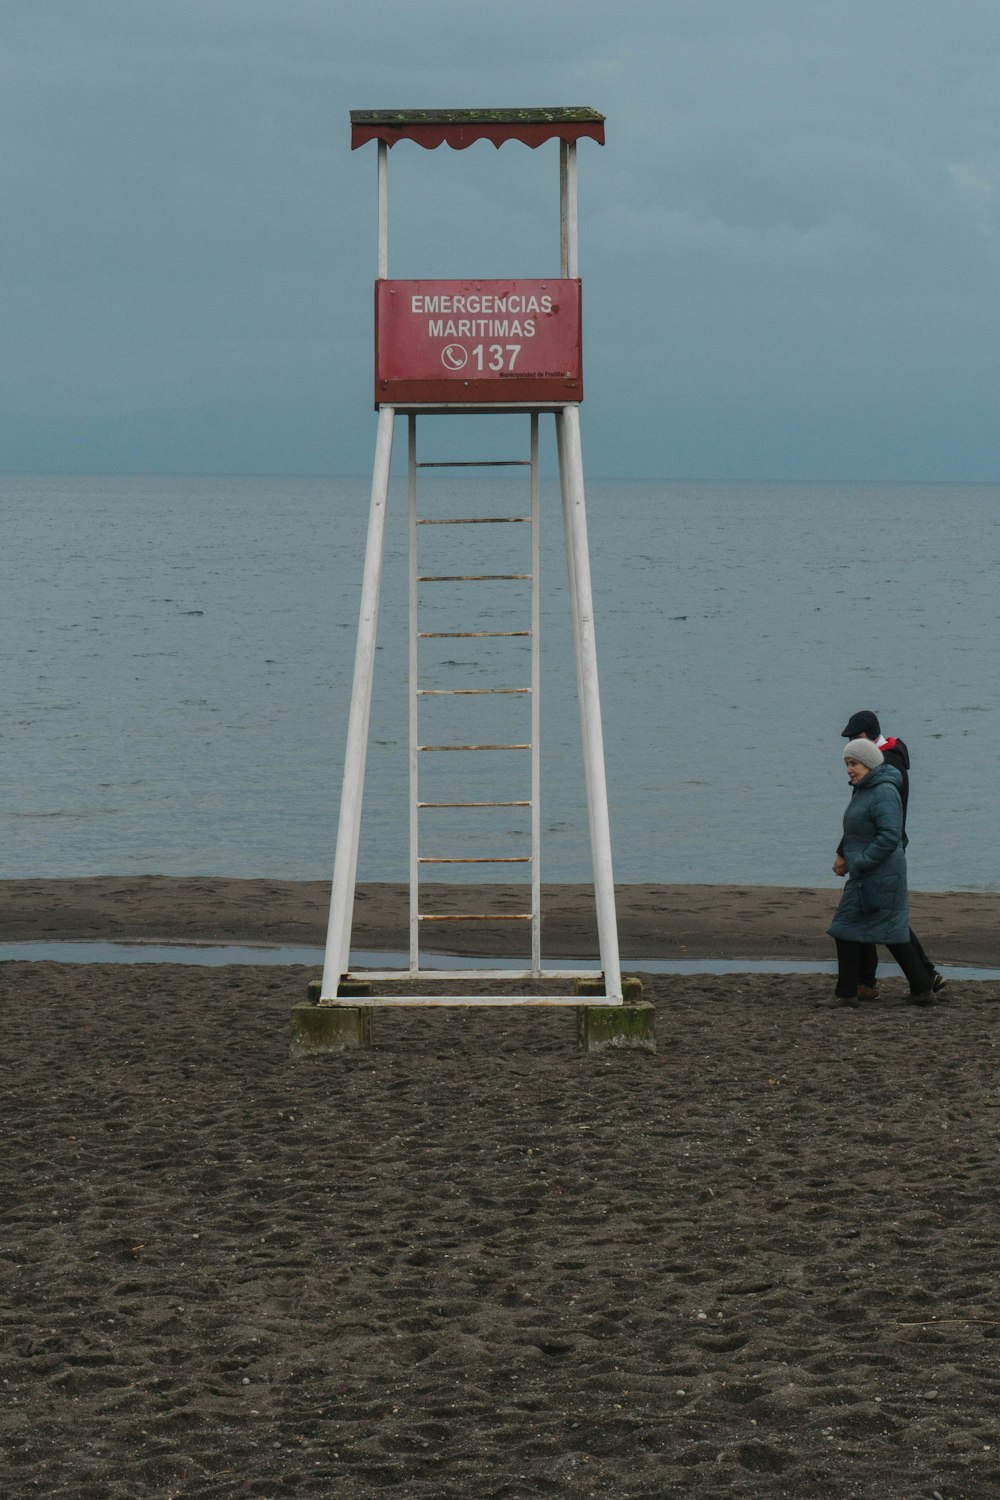 a person walking on a beach next to a lifeguard tower